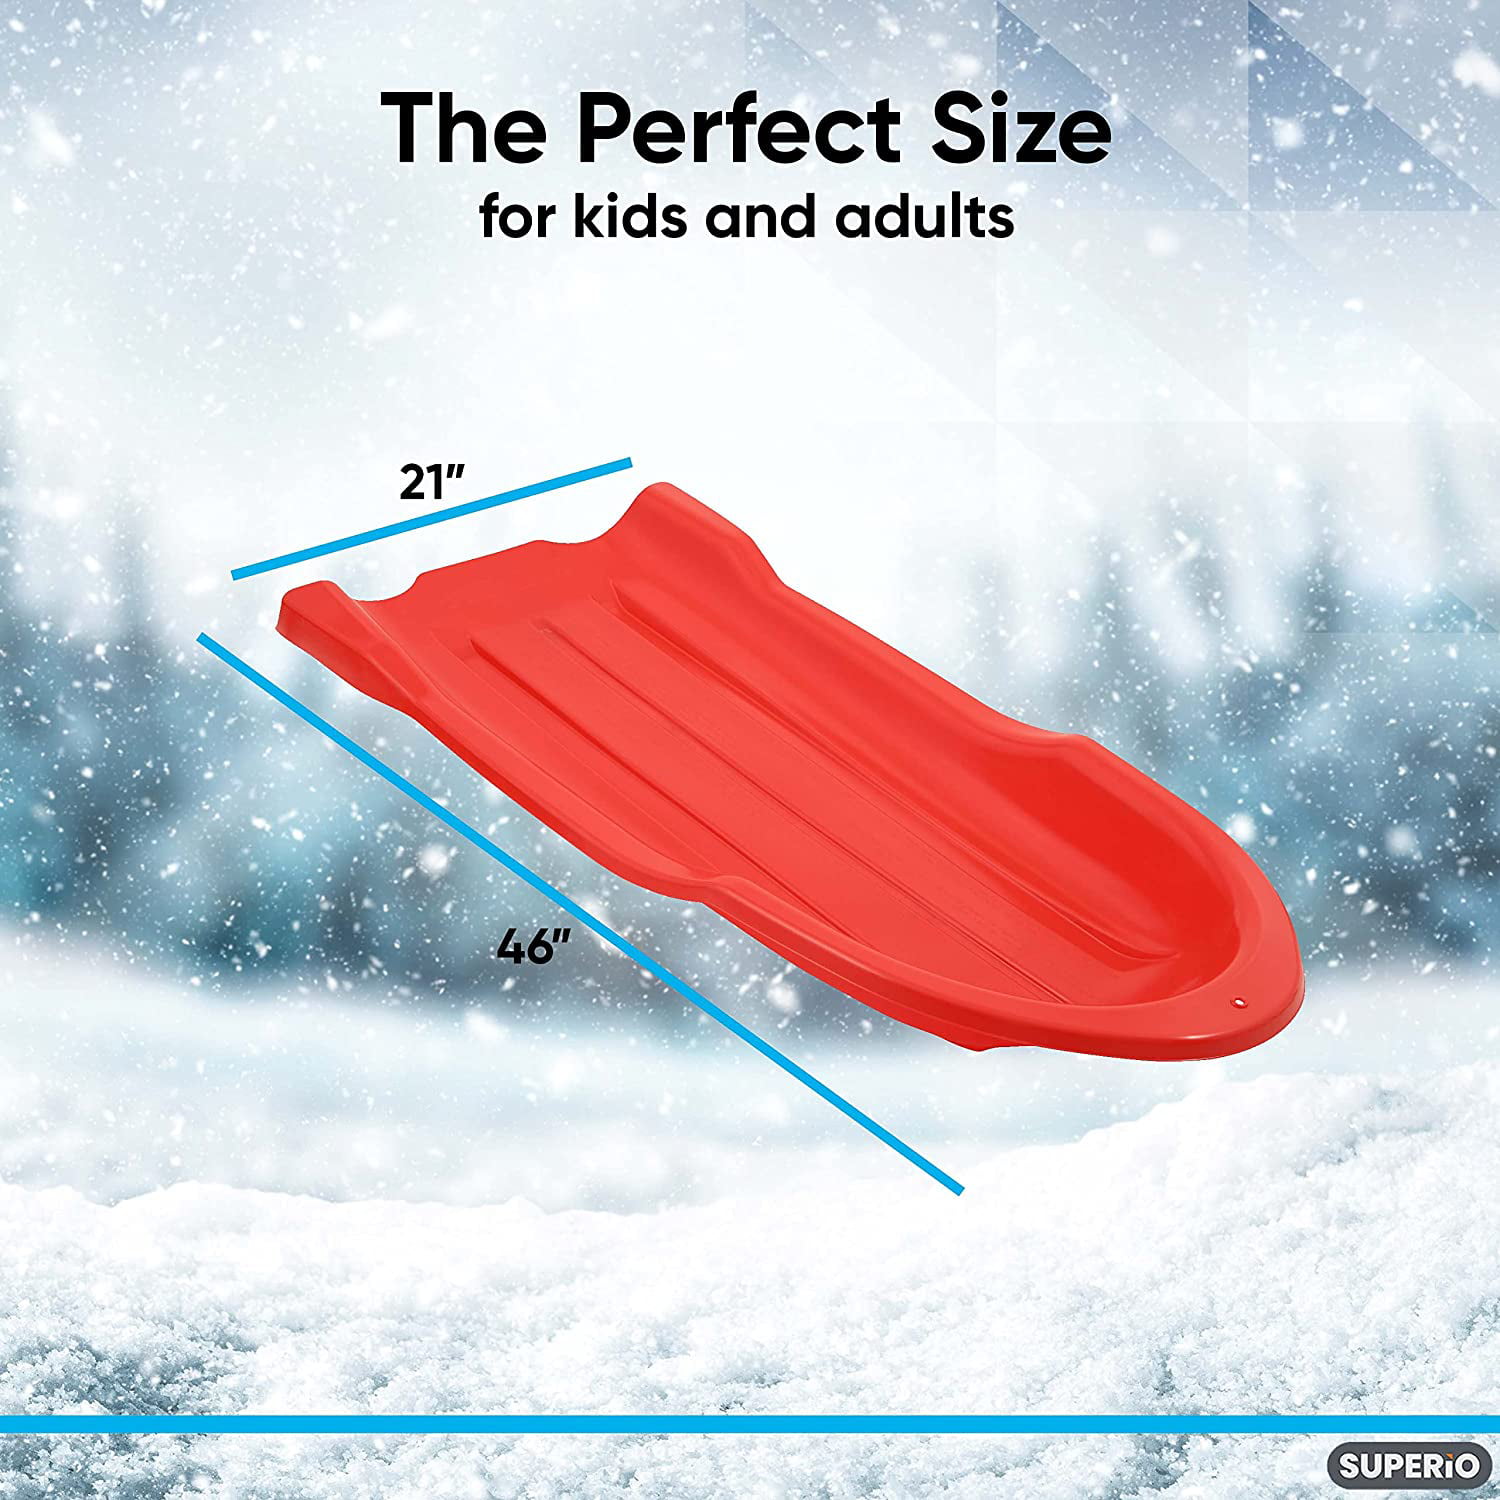 Long Sled 21 x 46,Winter Snow Fun for Kids and Adults Superio Torpedo Snow Sled 